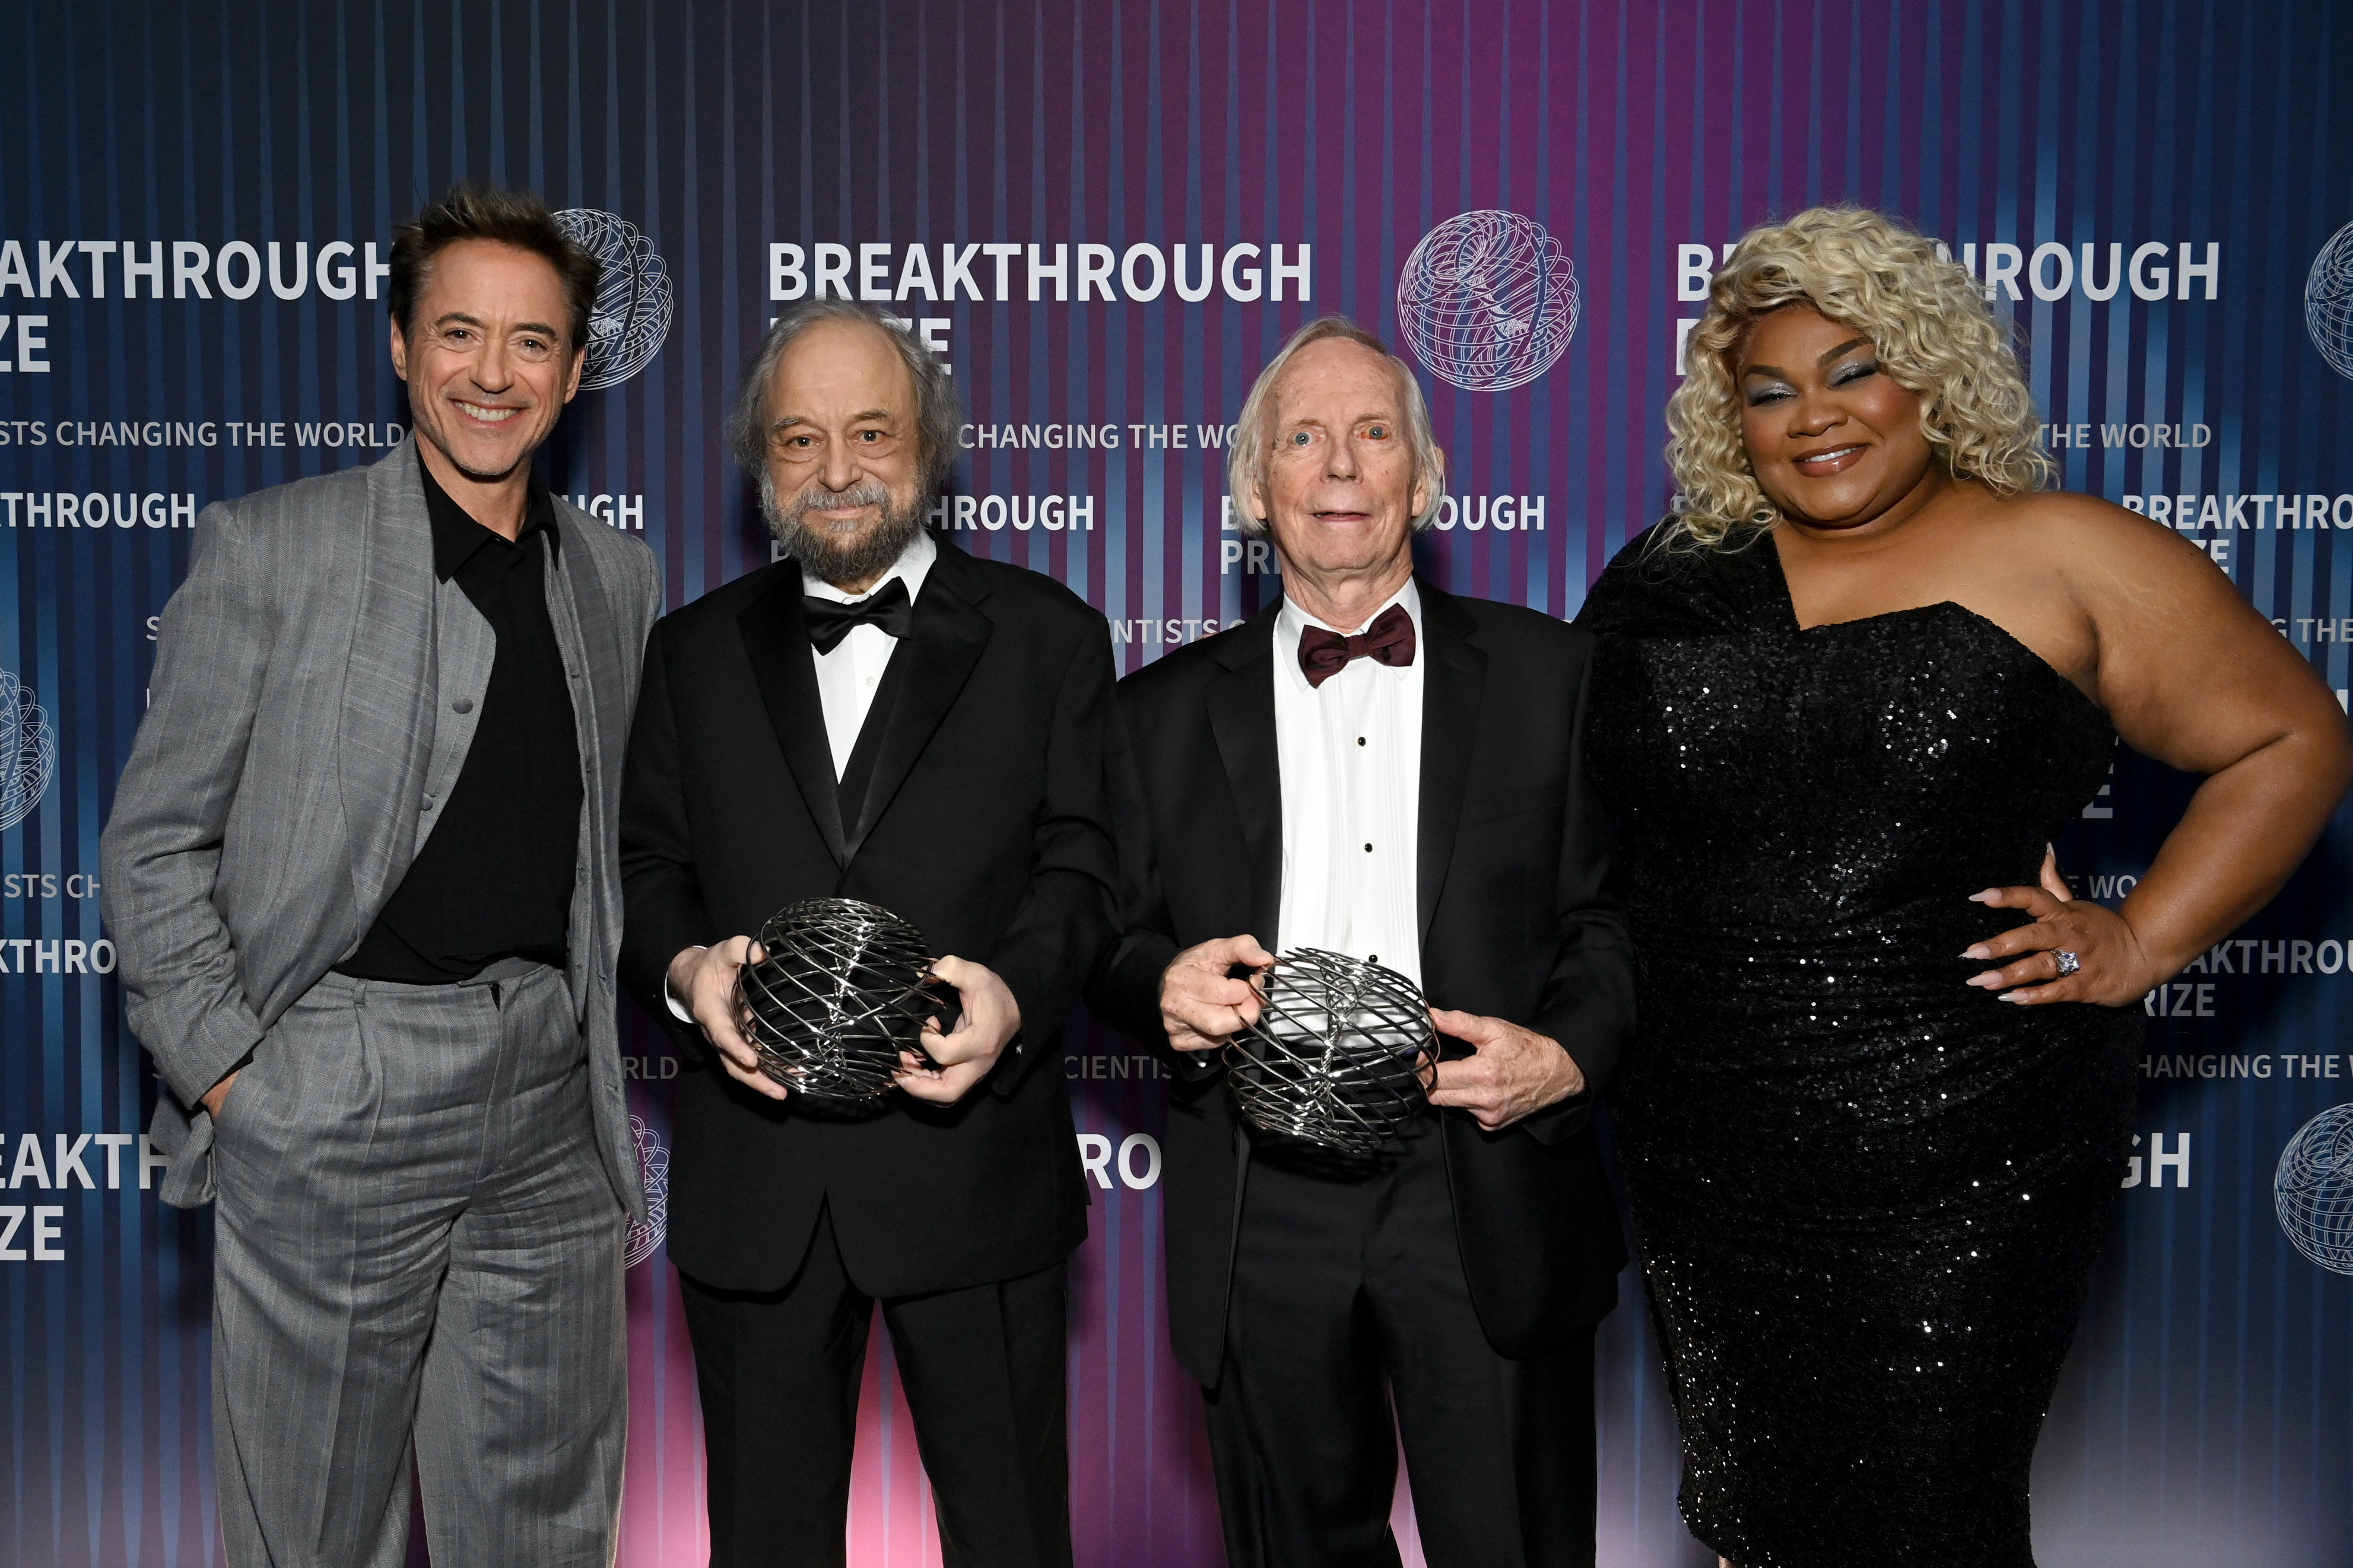 	LOS ANGELES, CALIFORNIA - APRIL 13: (L-R) Robert Downey Jr., honoree Dr. Alexander Zamolodchikov, honoree Dr. John Cardy, and Da'Vine Joy Randolph pose with awards during the 10th Breakthrough Prize Ceremony at the Academy of Motion Picture Arts and Sciences on April 13, 2024 in Los Angeles, California. (Photo by Jon Kopaloff/Getty Images for Breakthrough Prize)